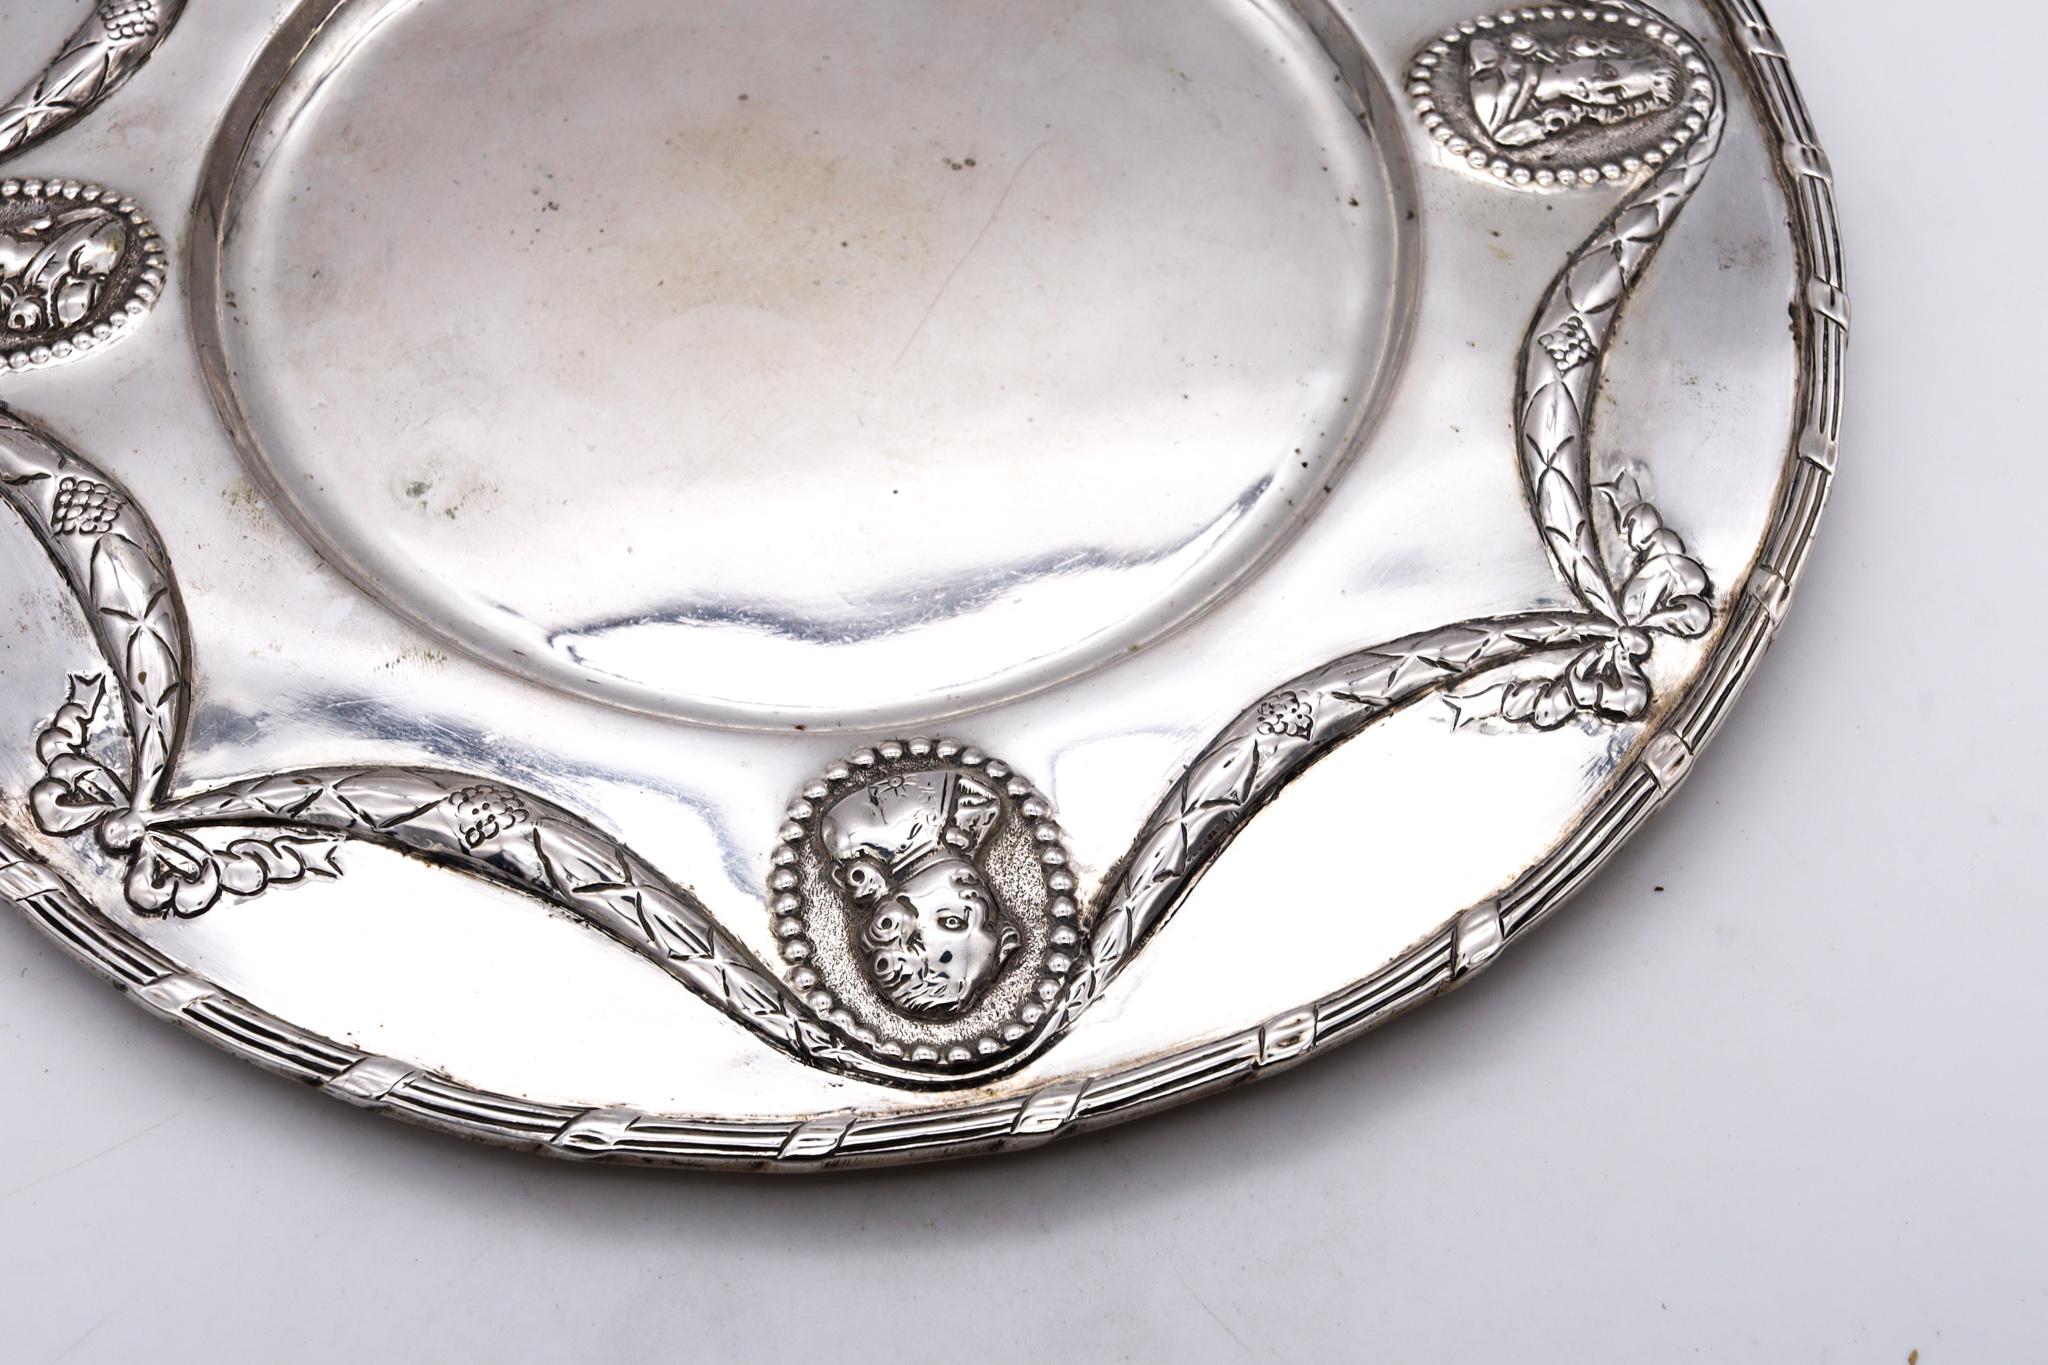 Germany Hanau 1820 Neoclassical Decorative Dish Plate in Solid Sterling Silver For Sale 1